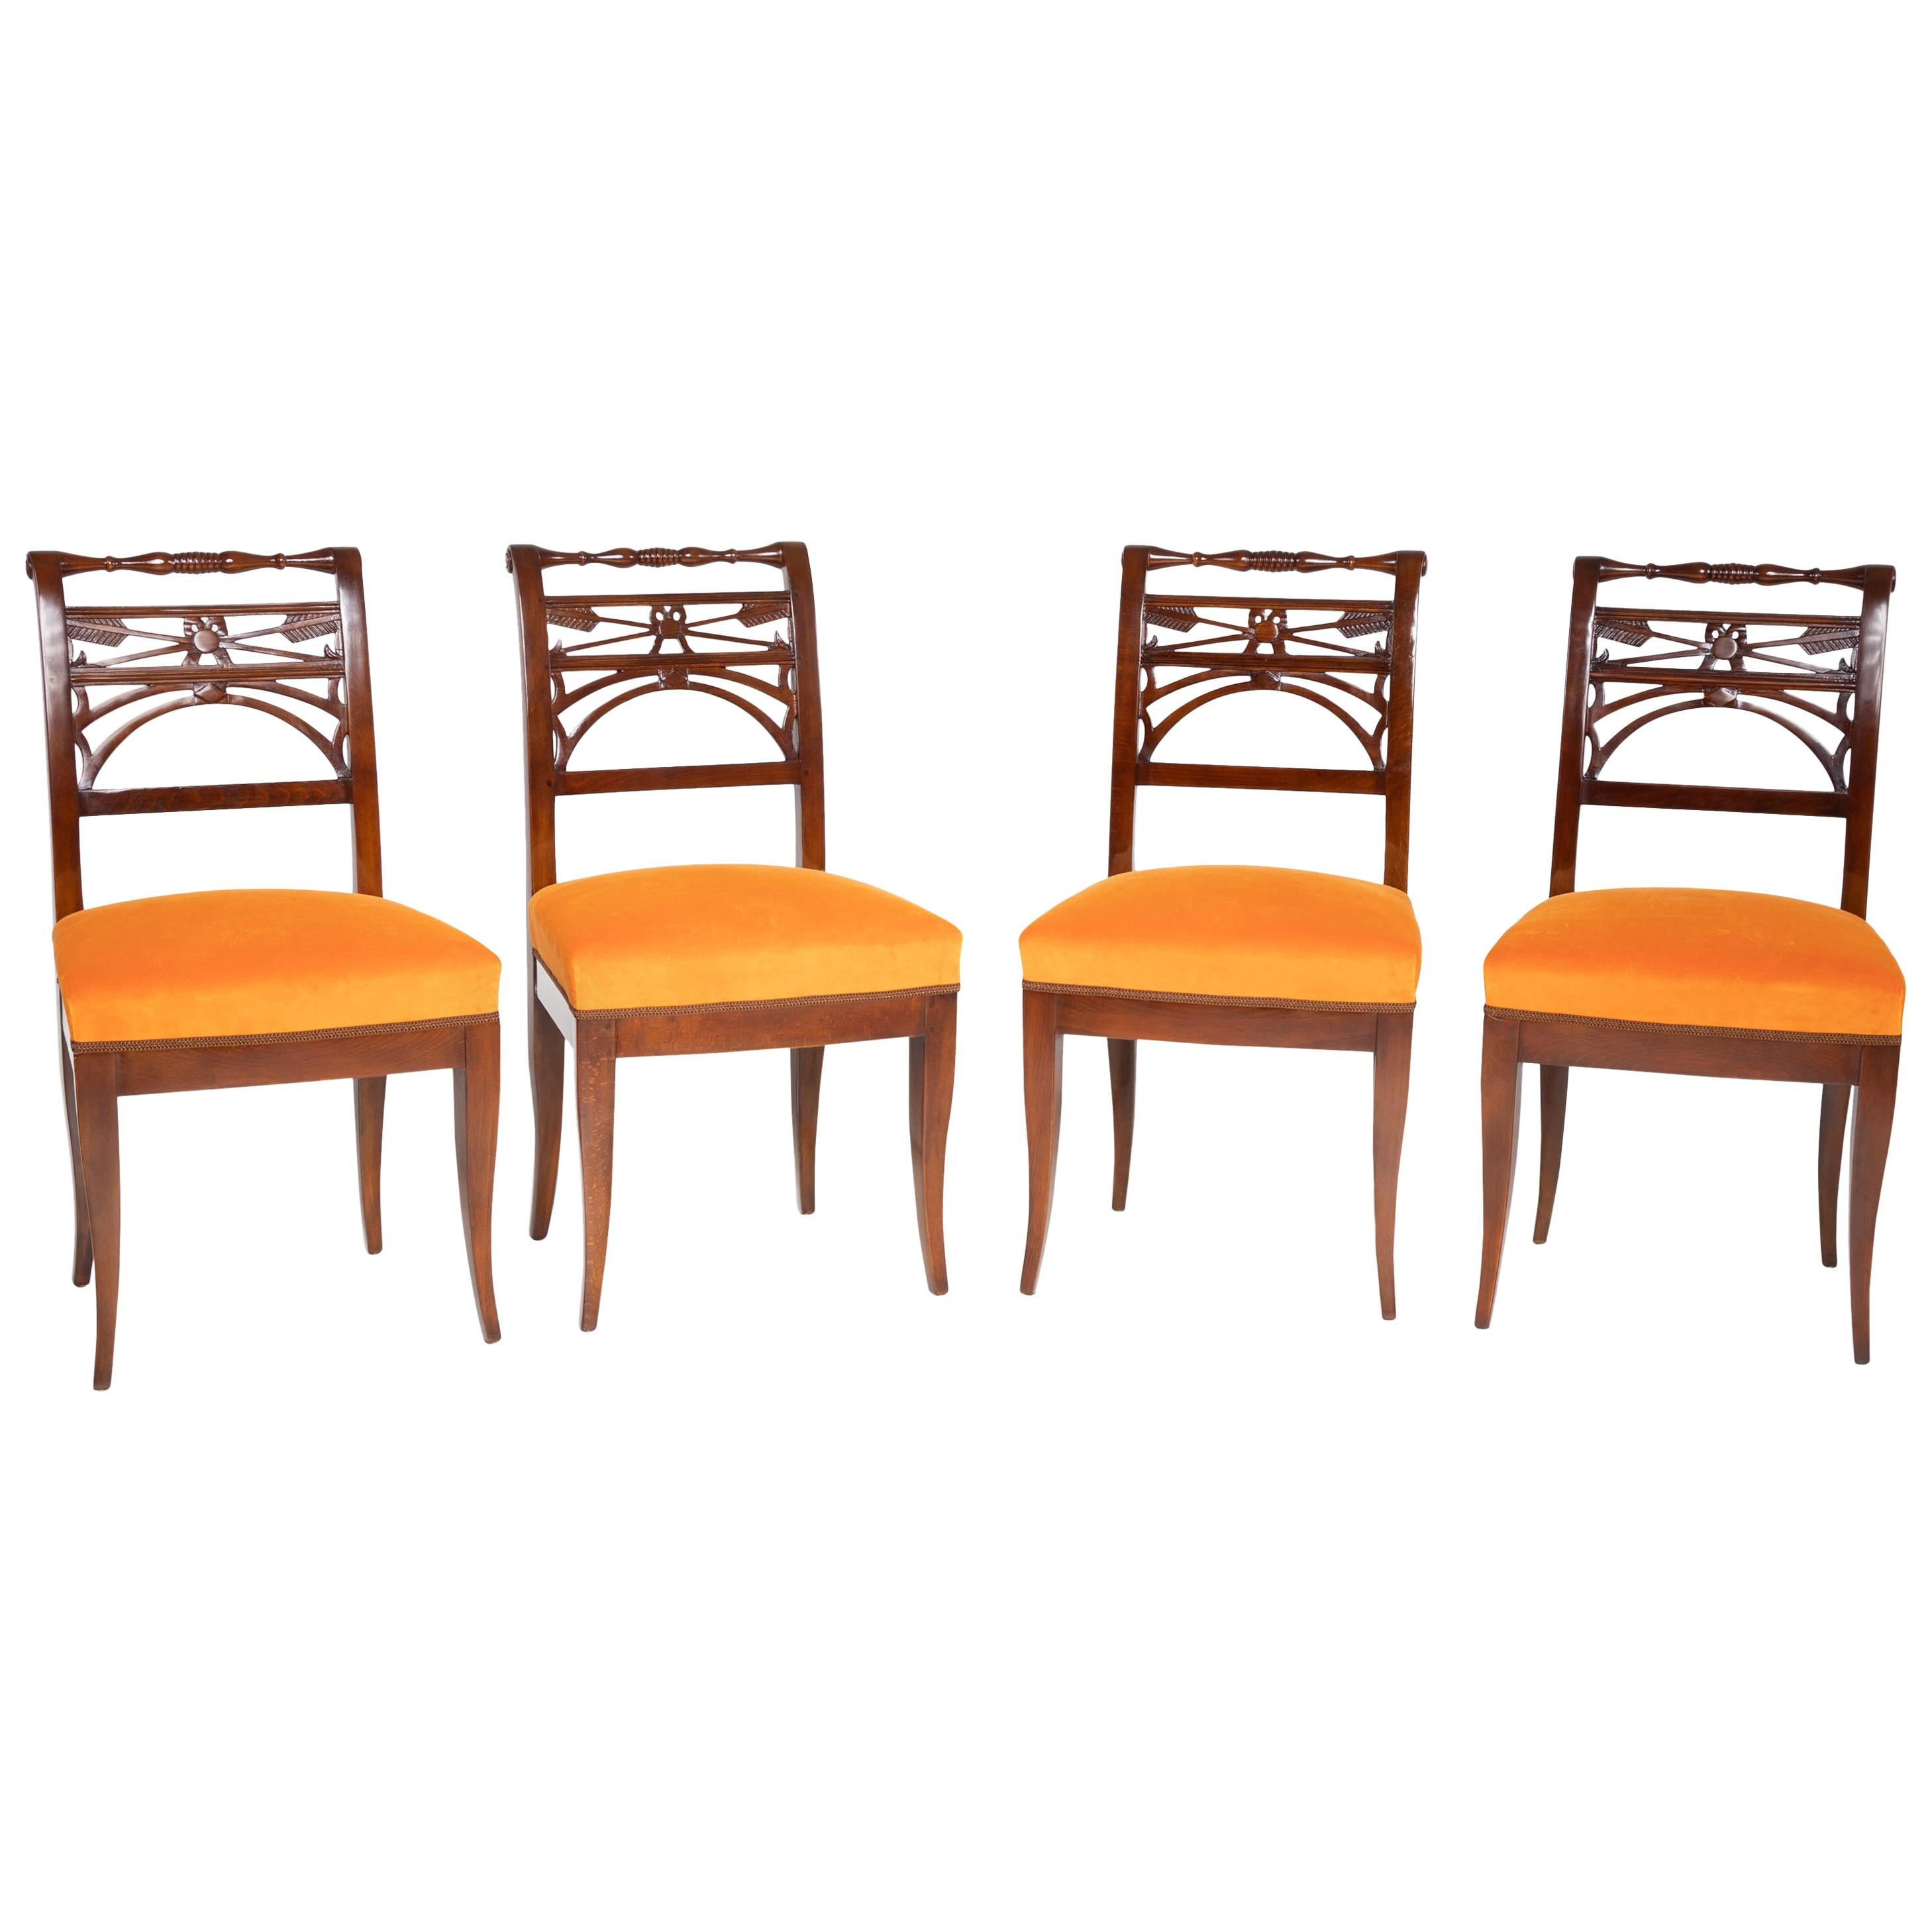 Neoclassical Chairs, Early 19th Century